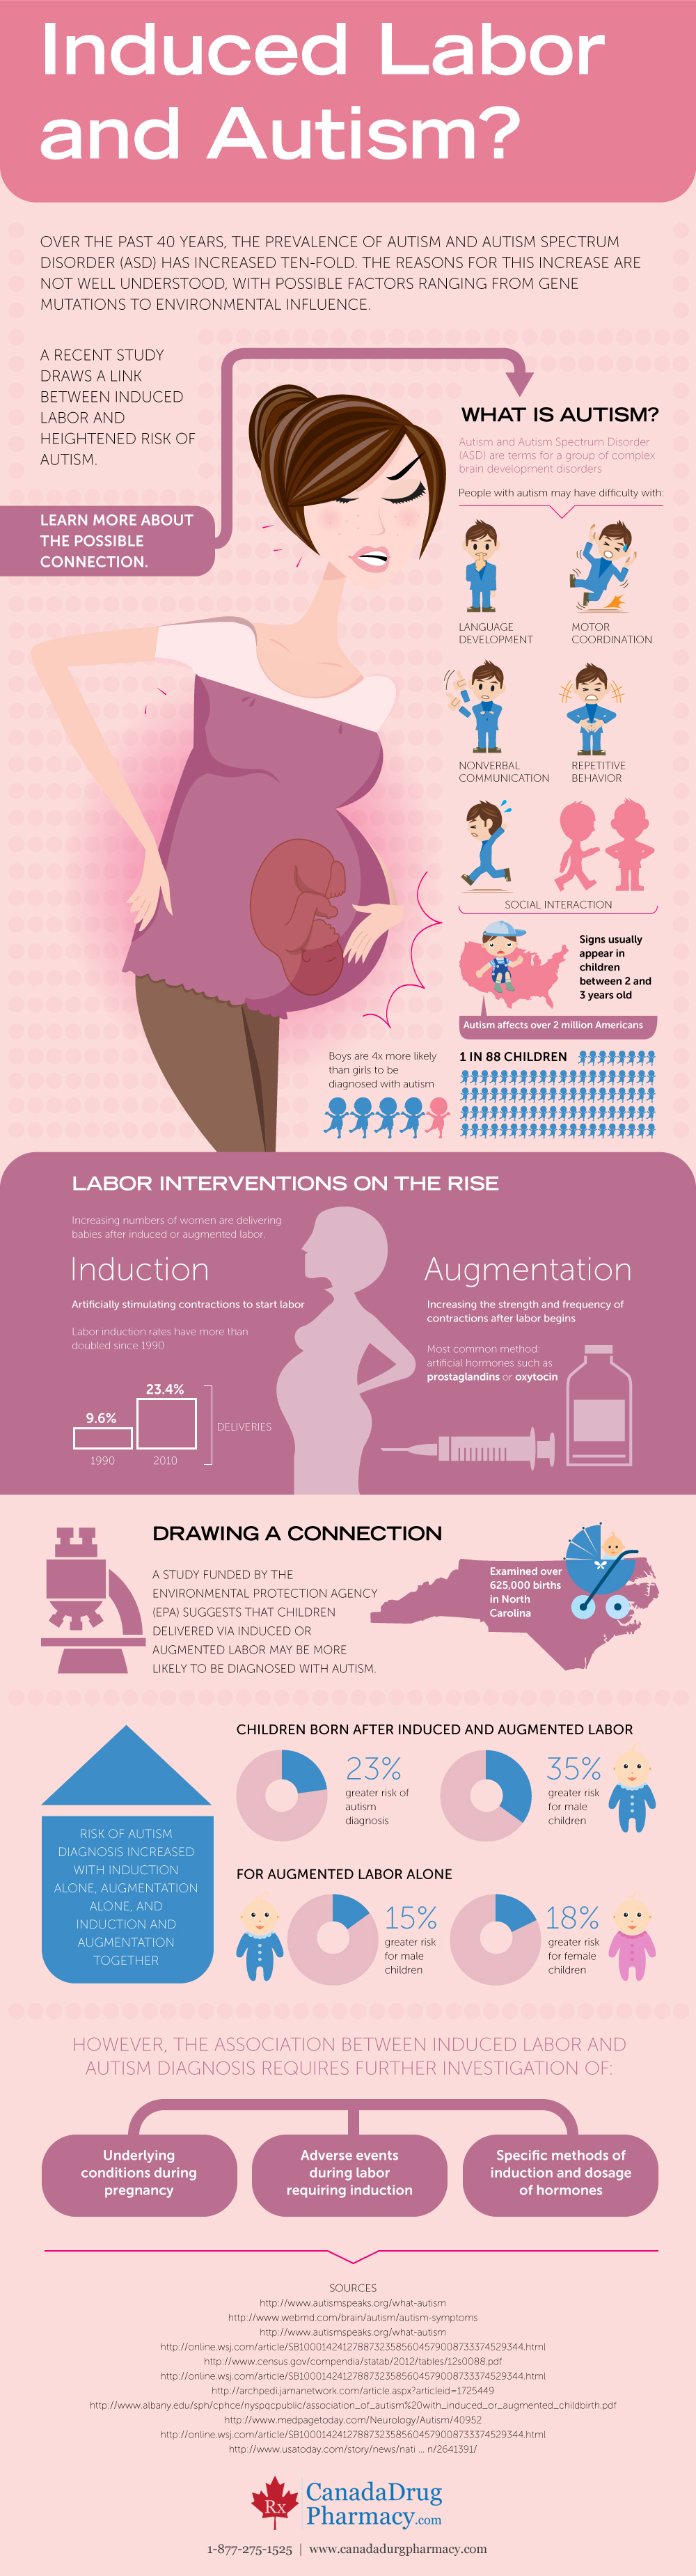 Pros And Cons Of Inducing Labor At 40 Weeks